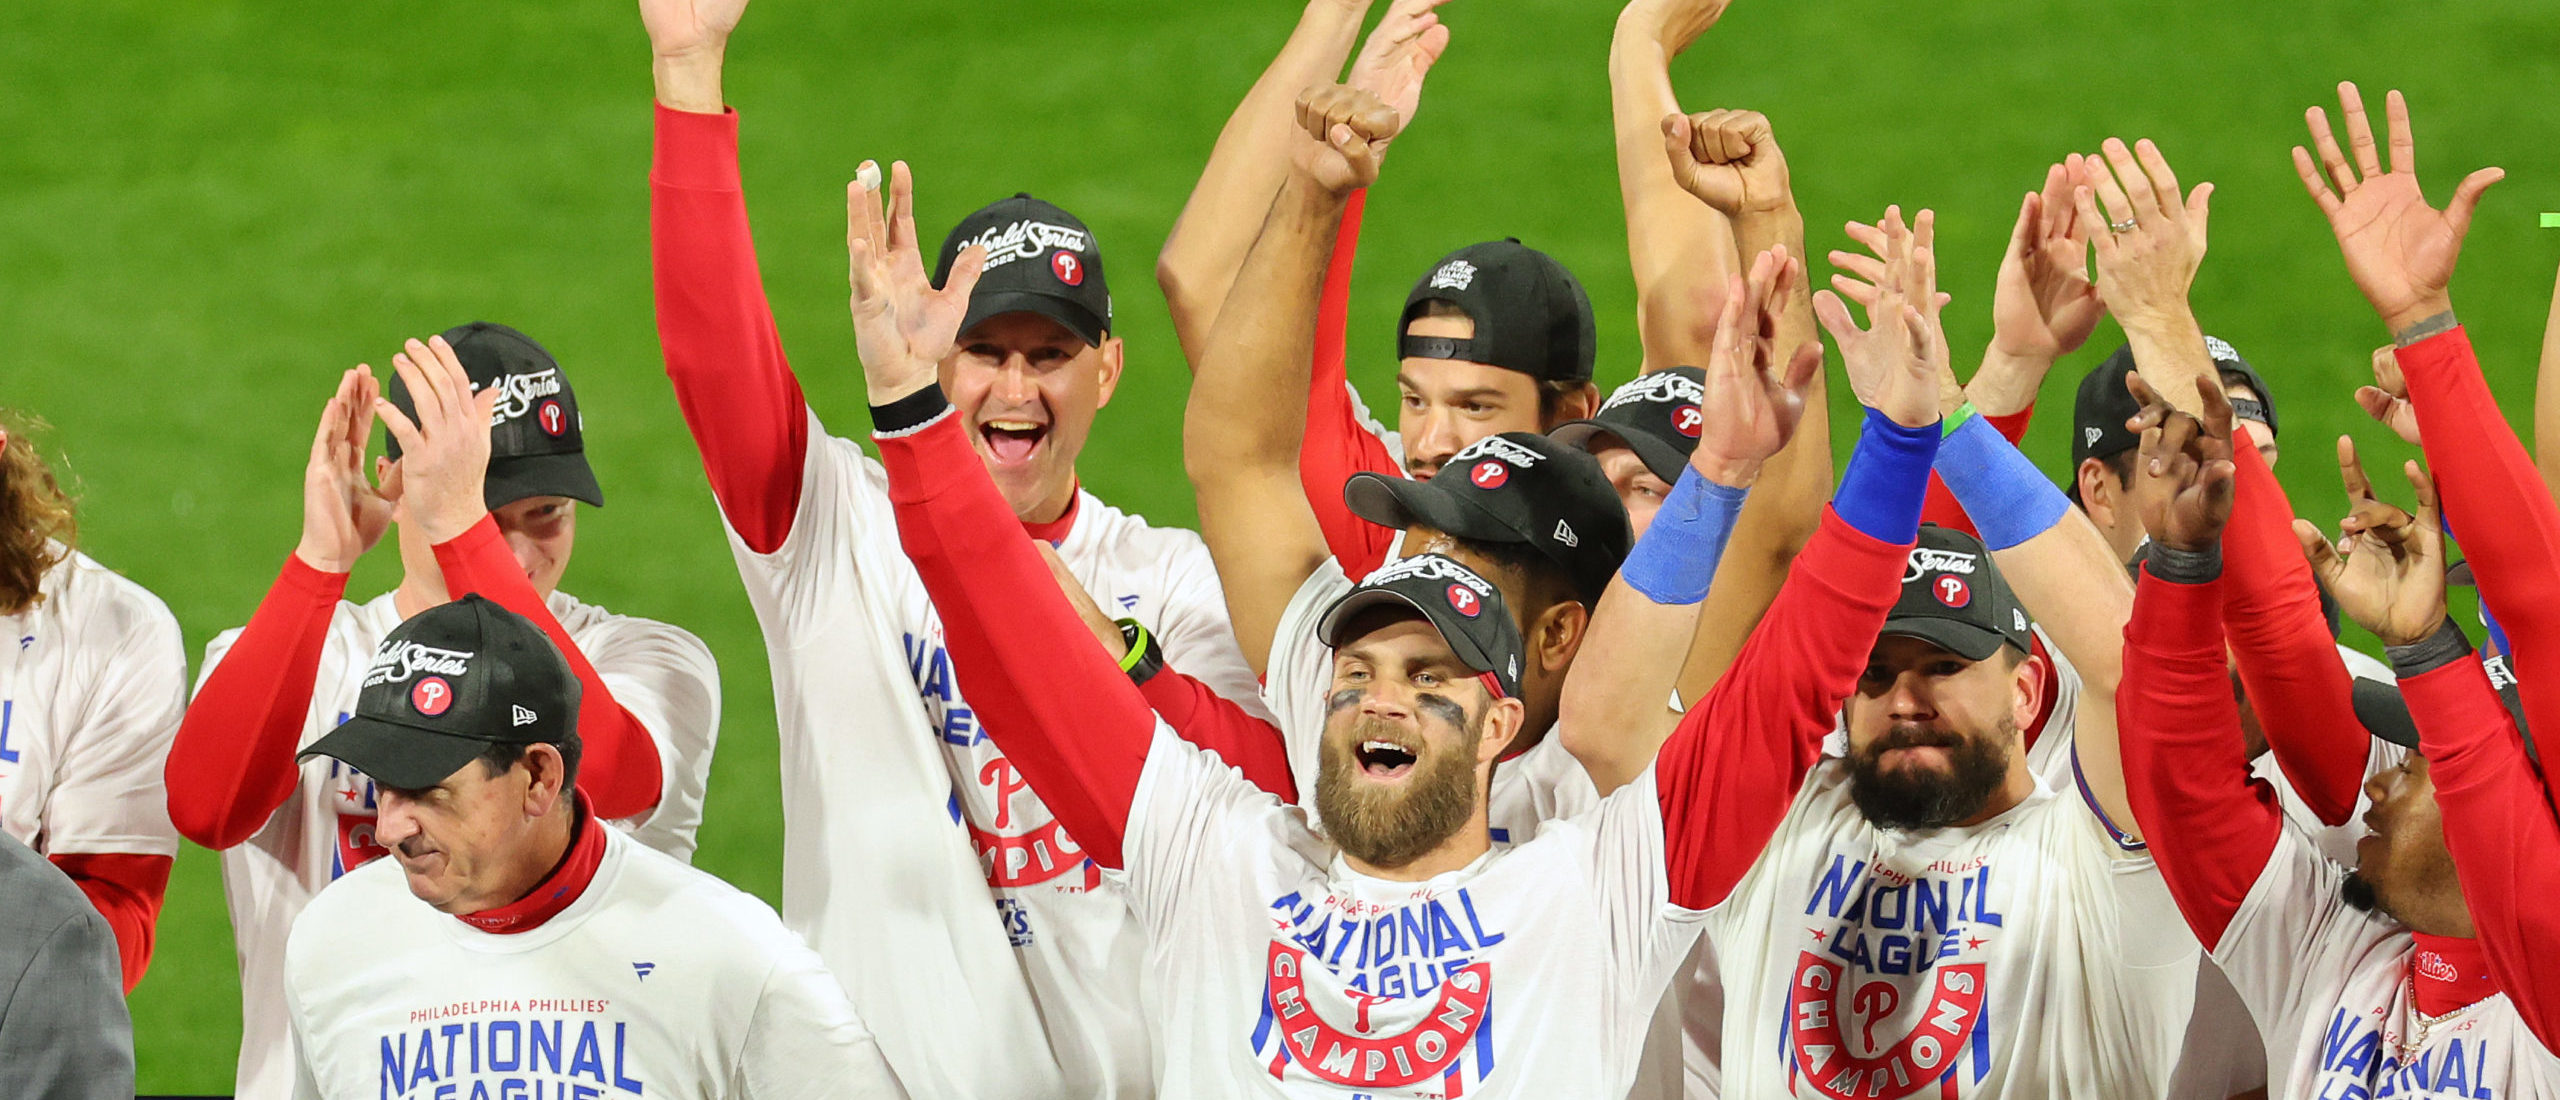 MLB Network - For the first time since 2009, the Philadelphia Phillies are  heading to the World Series! 🔔